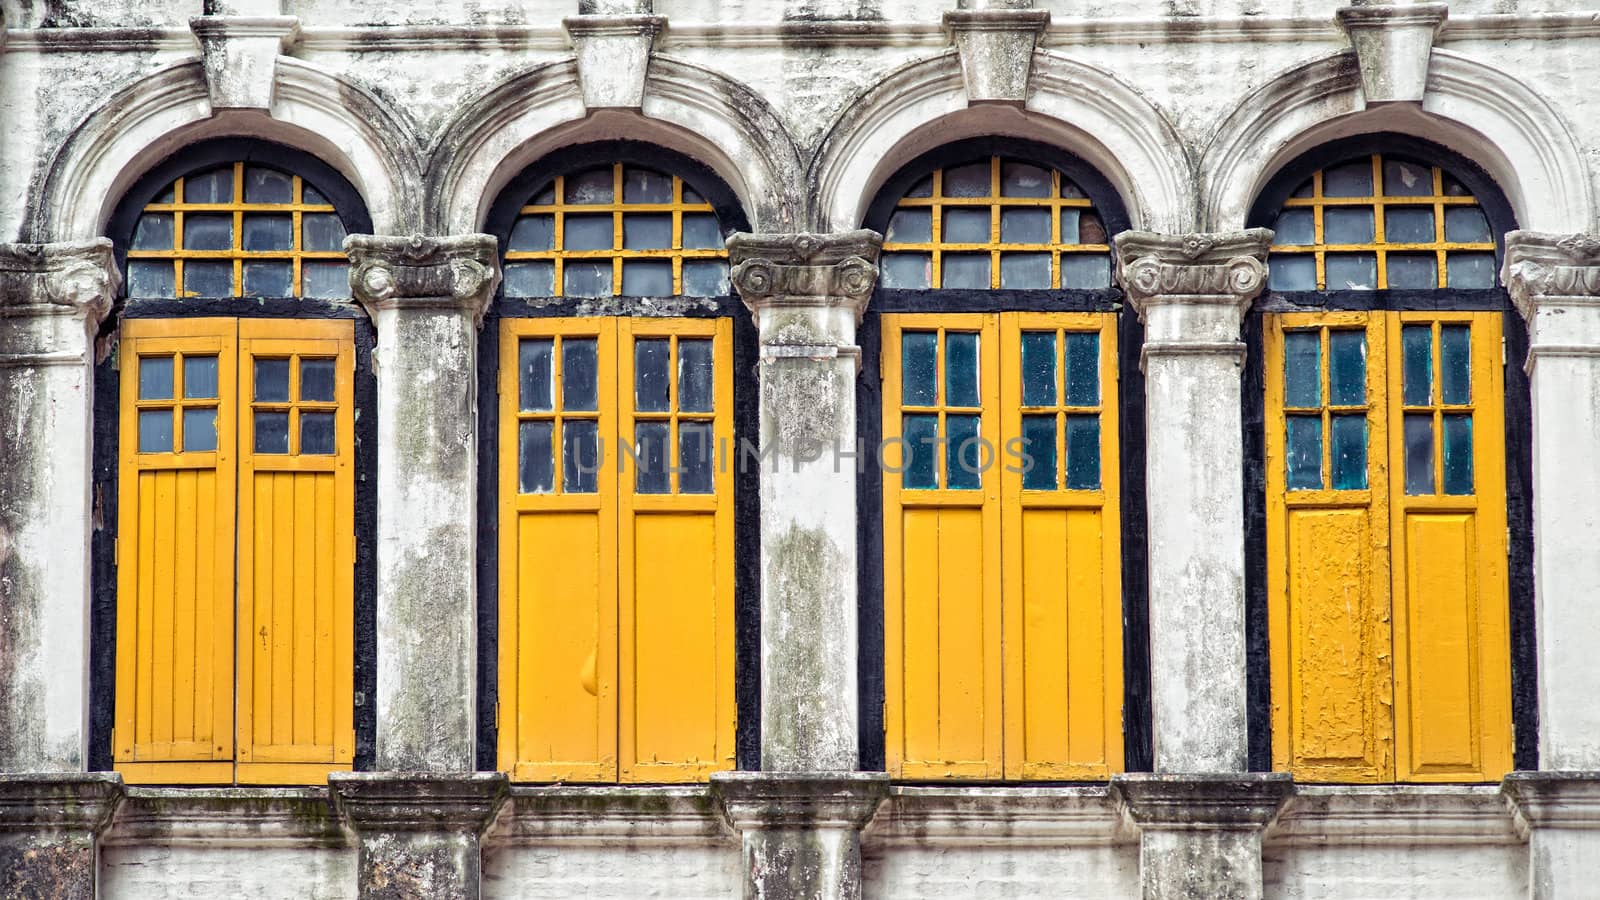 Four wooden yellow windows in old building with arches and columns